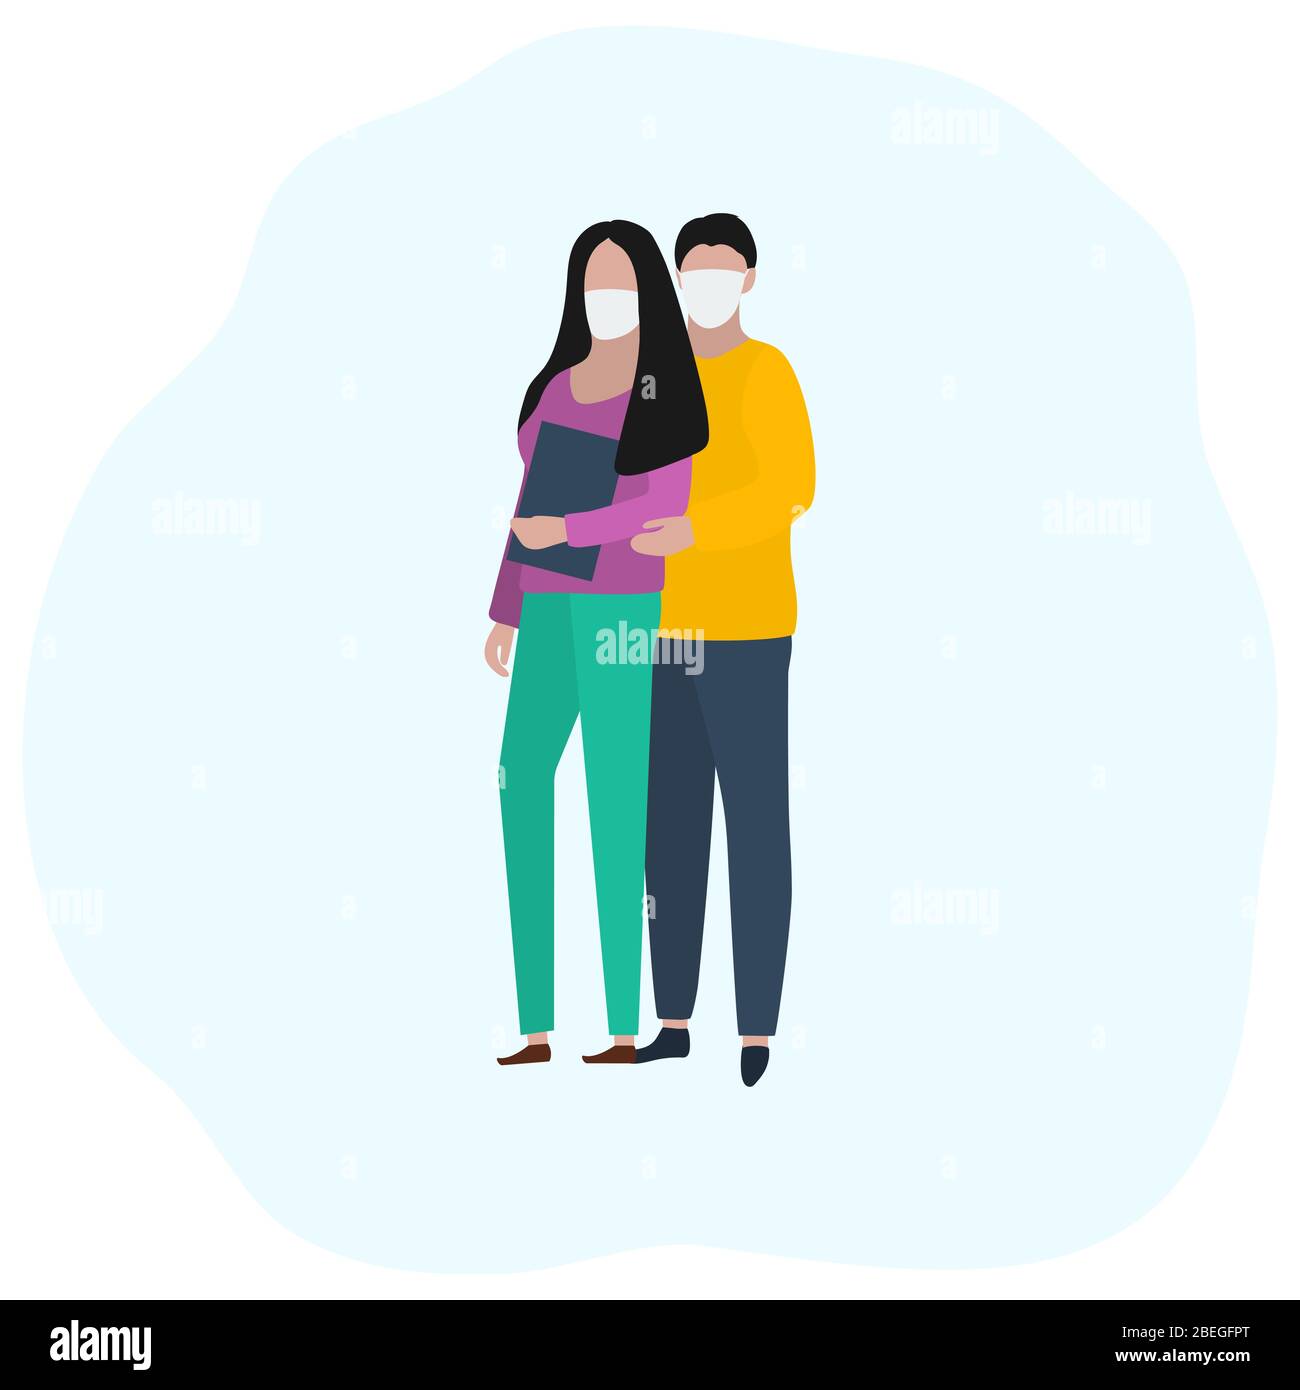 Man and a woman in medical masks. Fashion trendy illustration, flat design. Pandemic and epidemic of coronavirus in the world Stock Vector